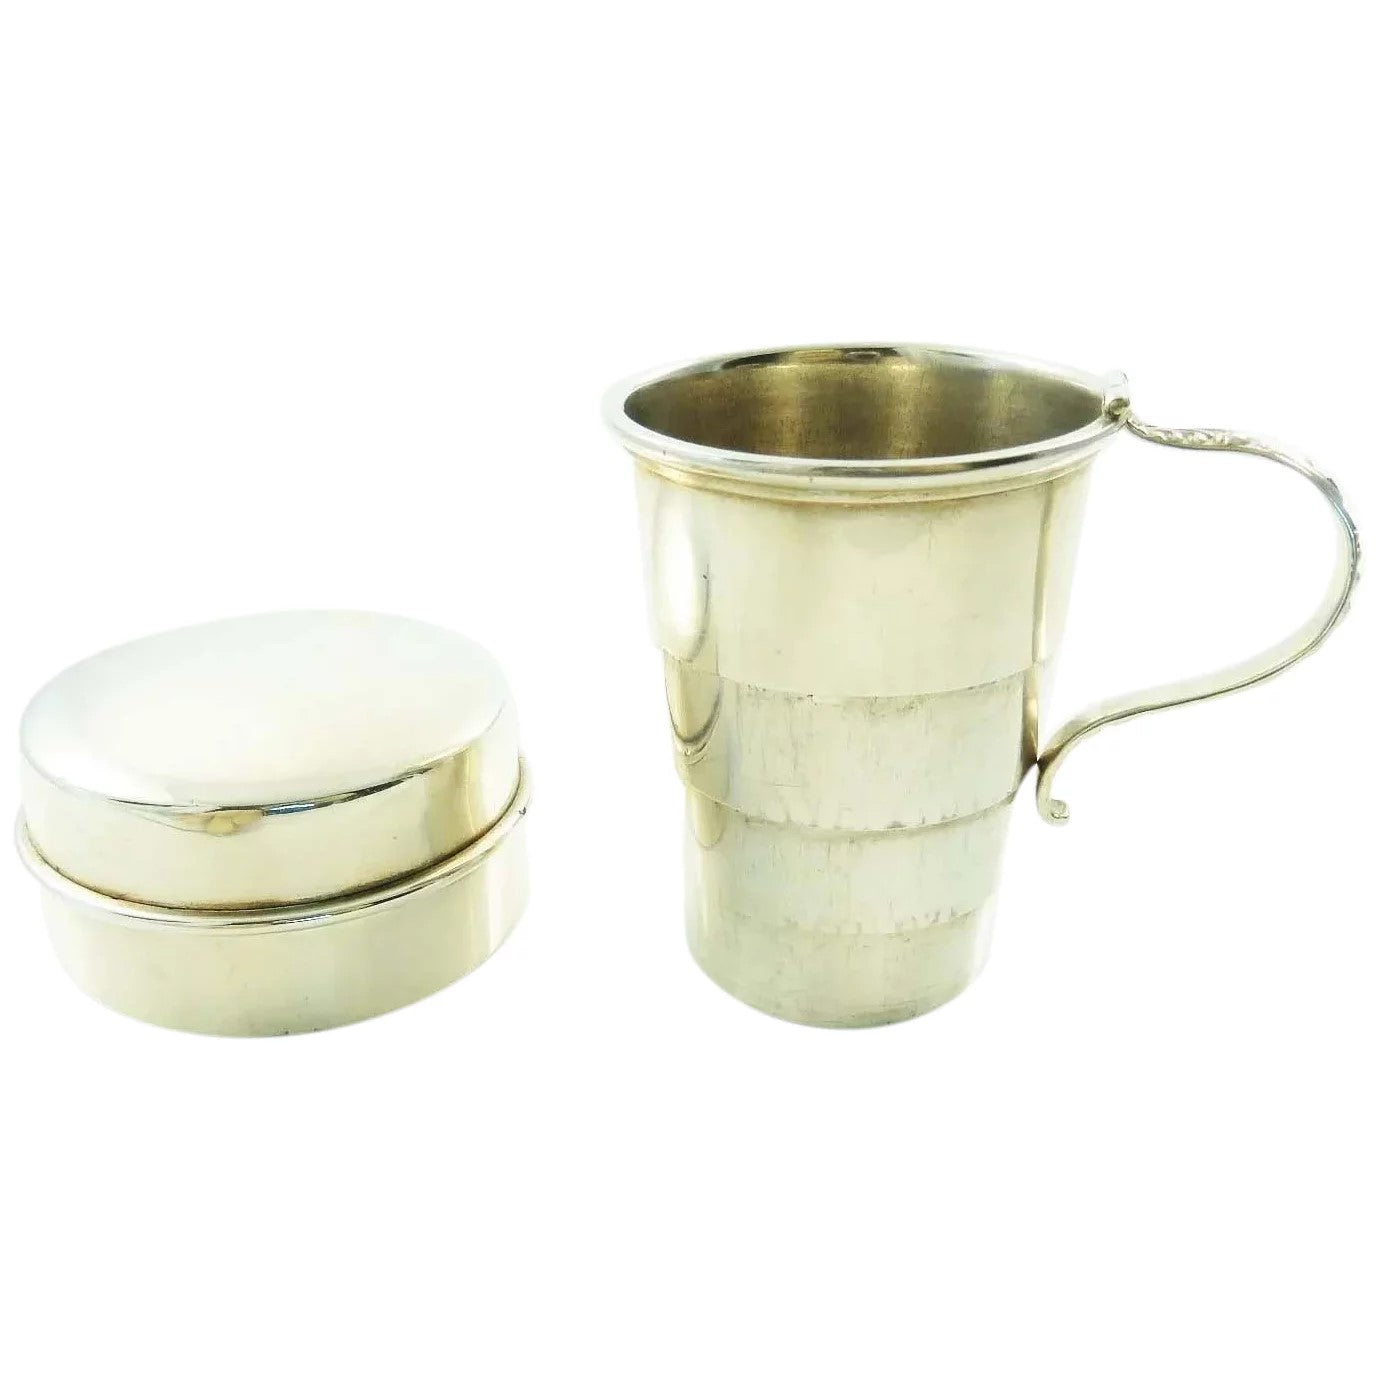 Antique Sterling Silver Collapsible Traveling Cup or Beaker - 43 Chesapeake Court Antiques